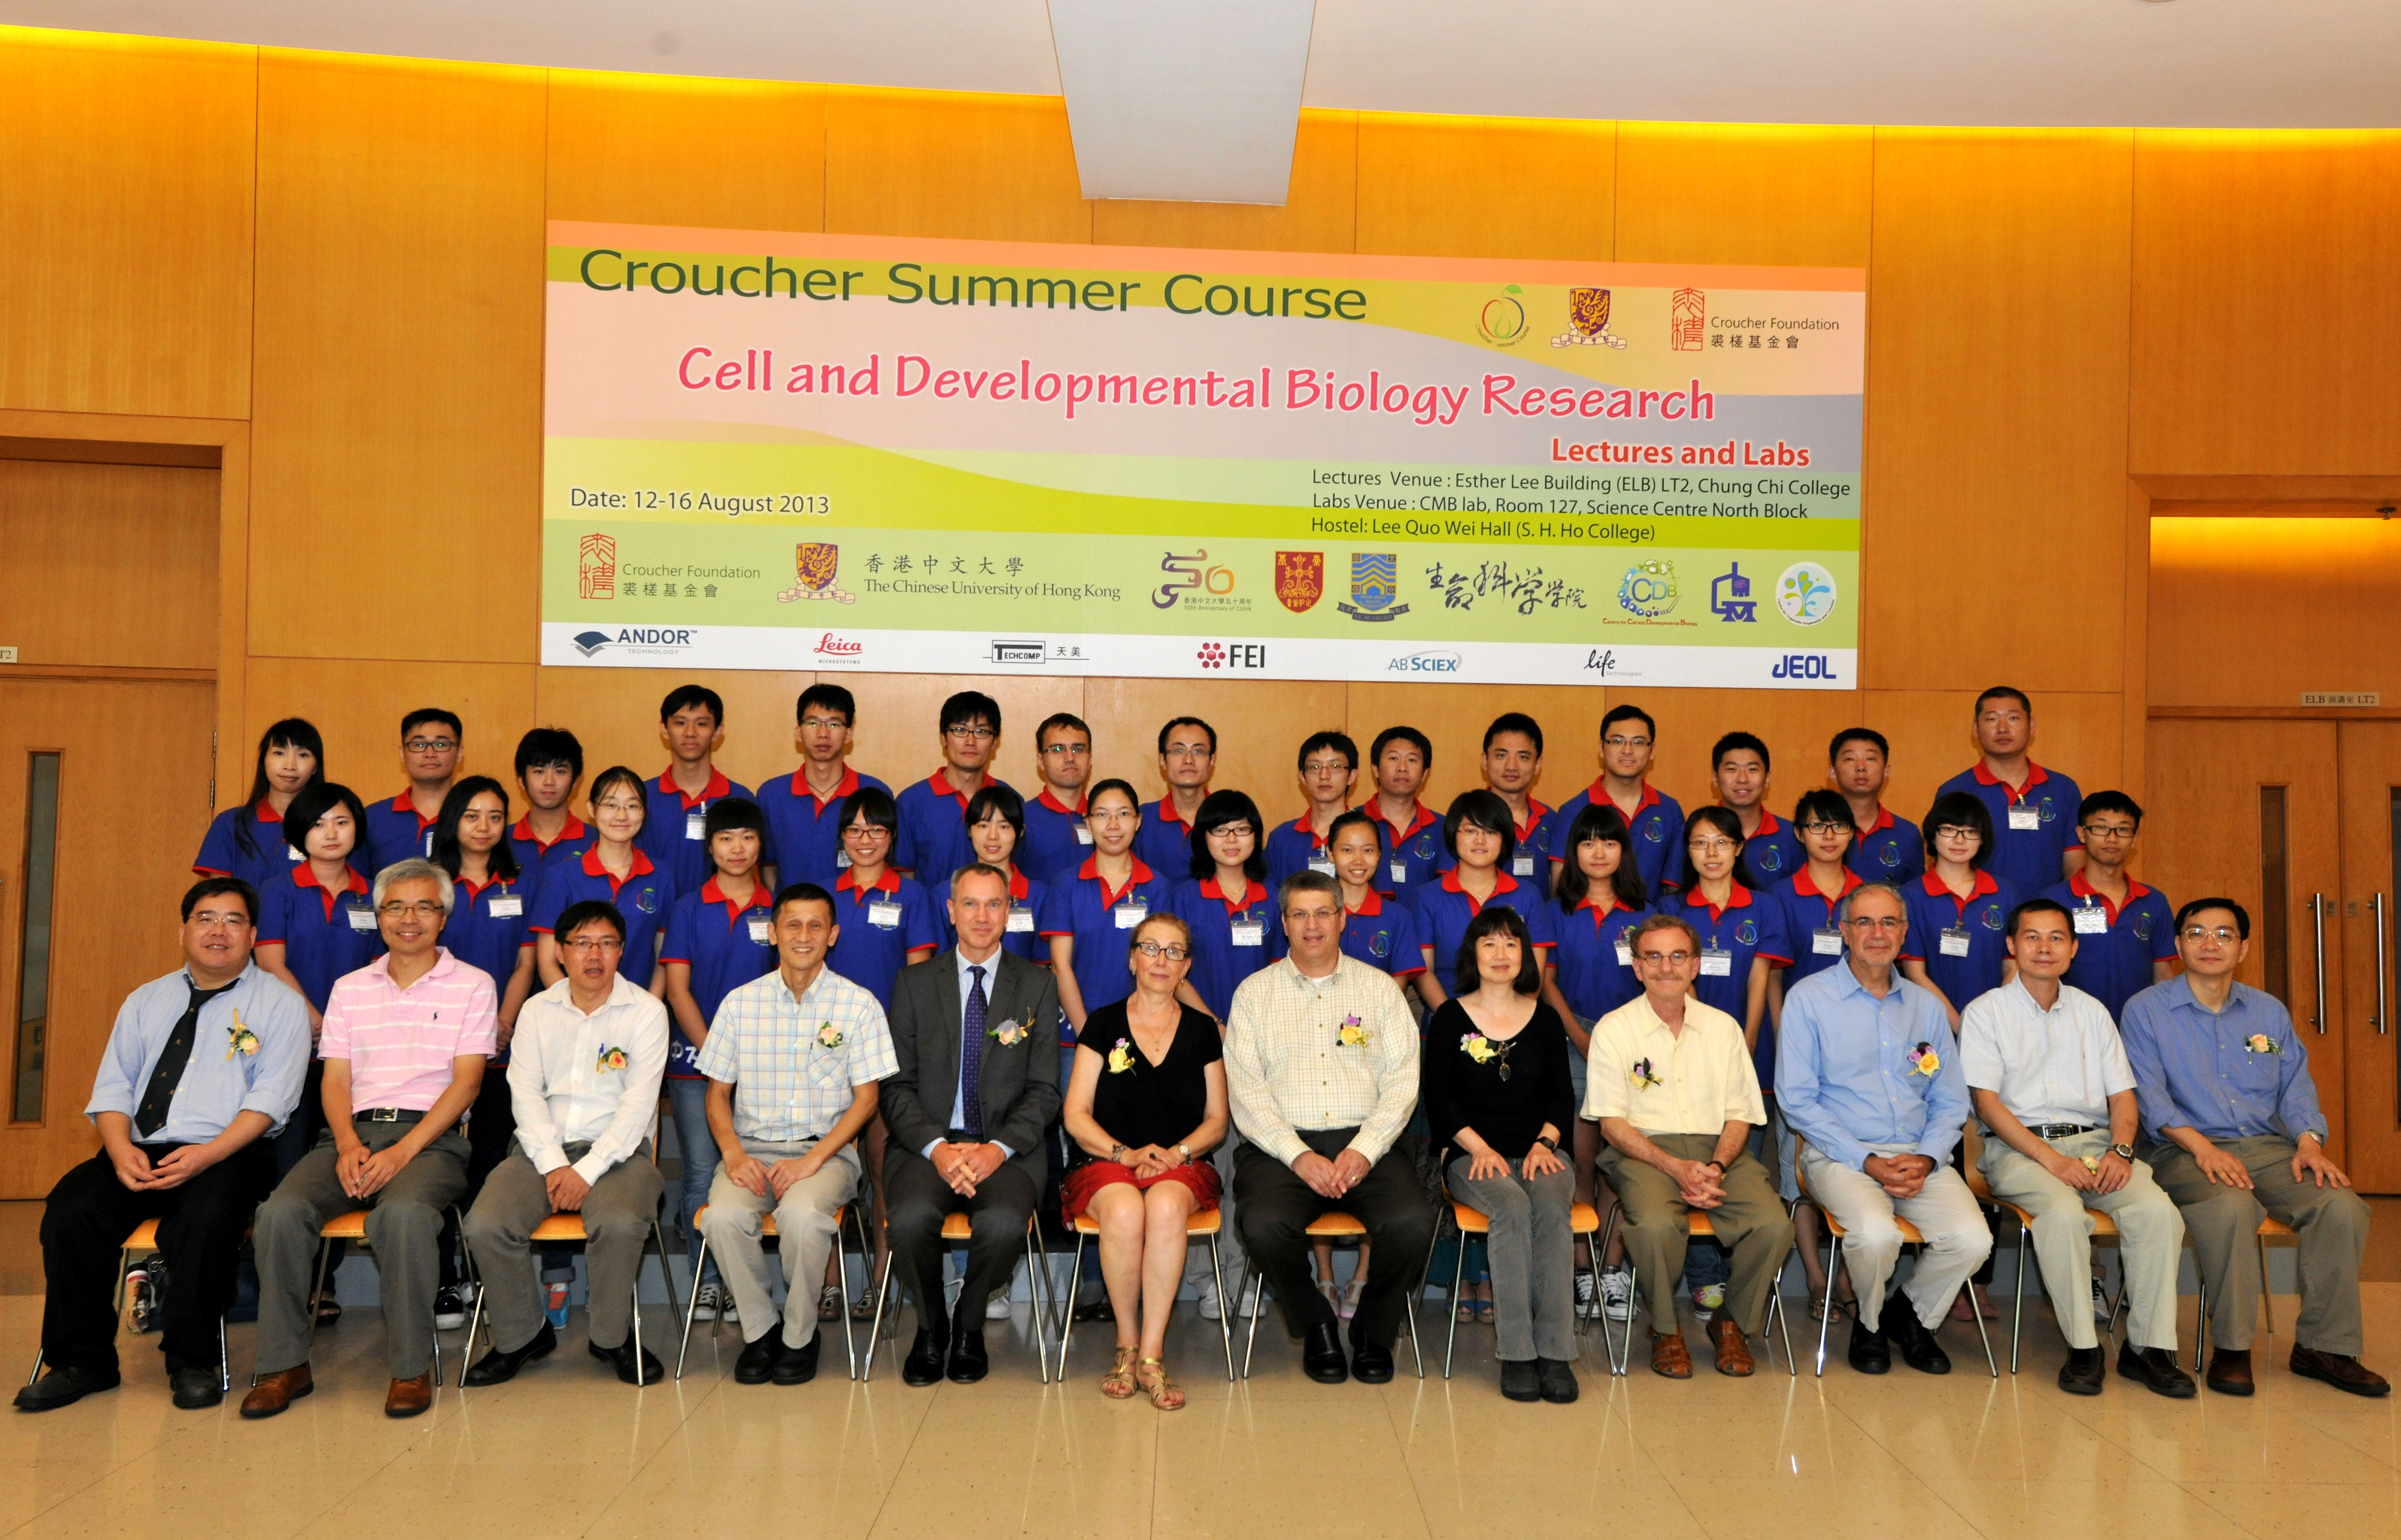 Croucher Summer Course 2013 - Group Photo at Lobby